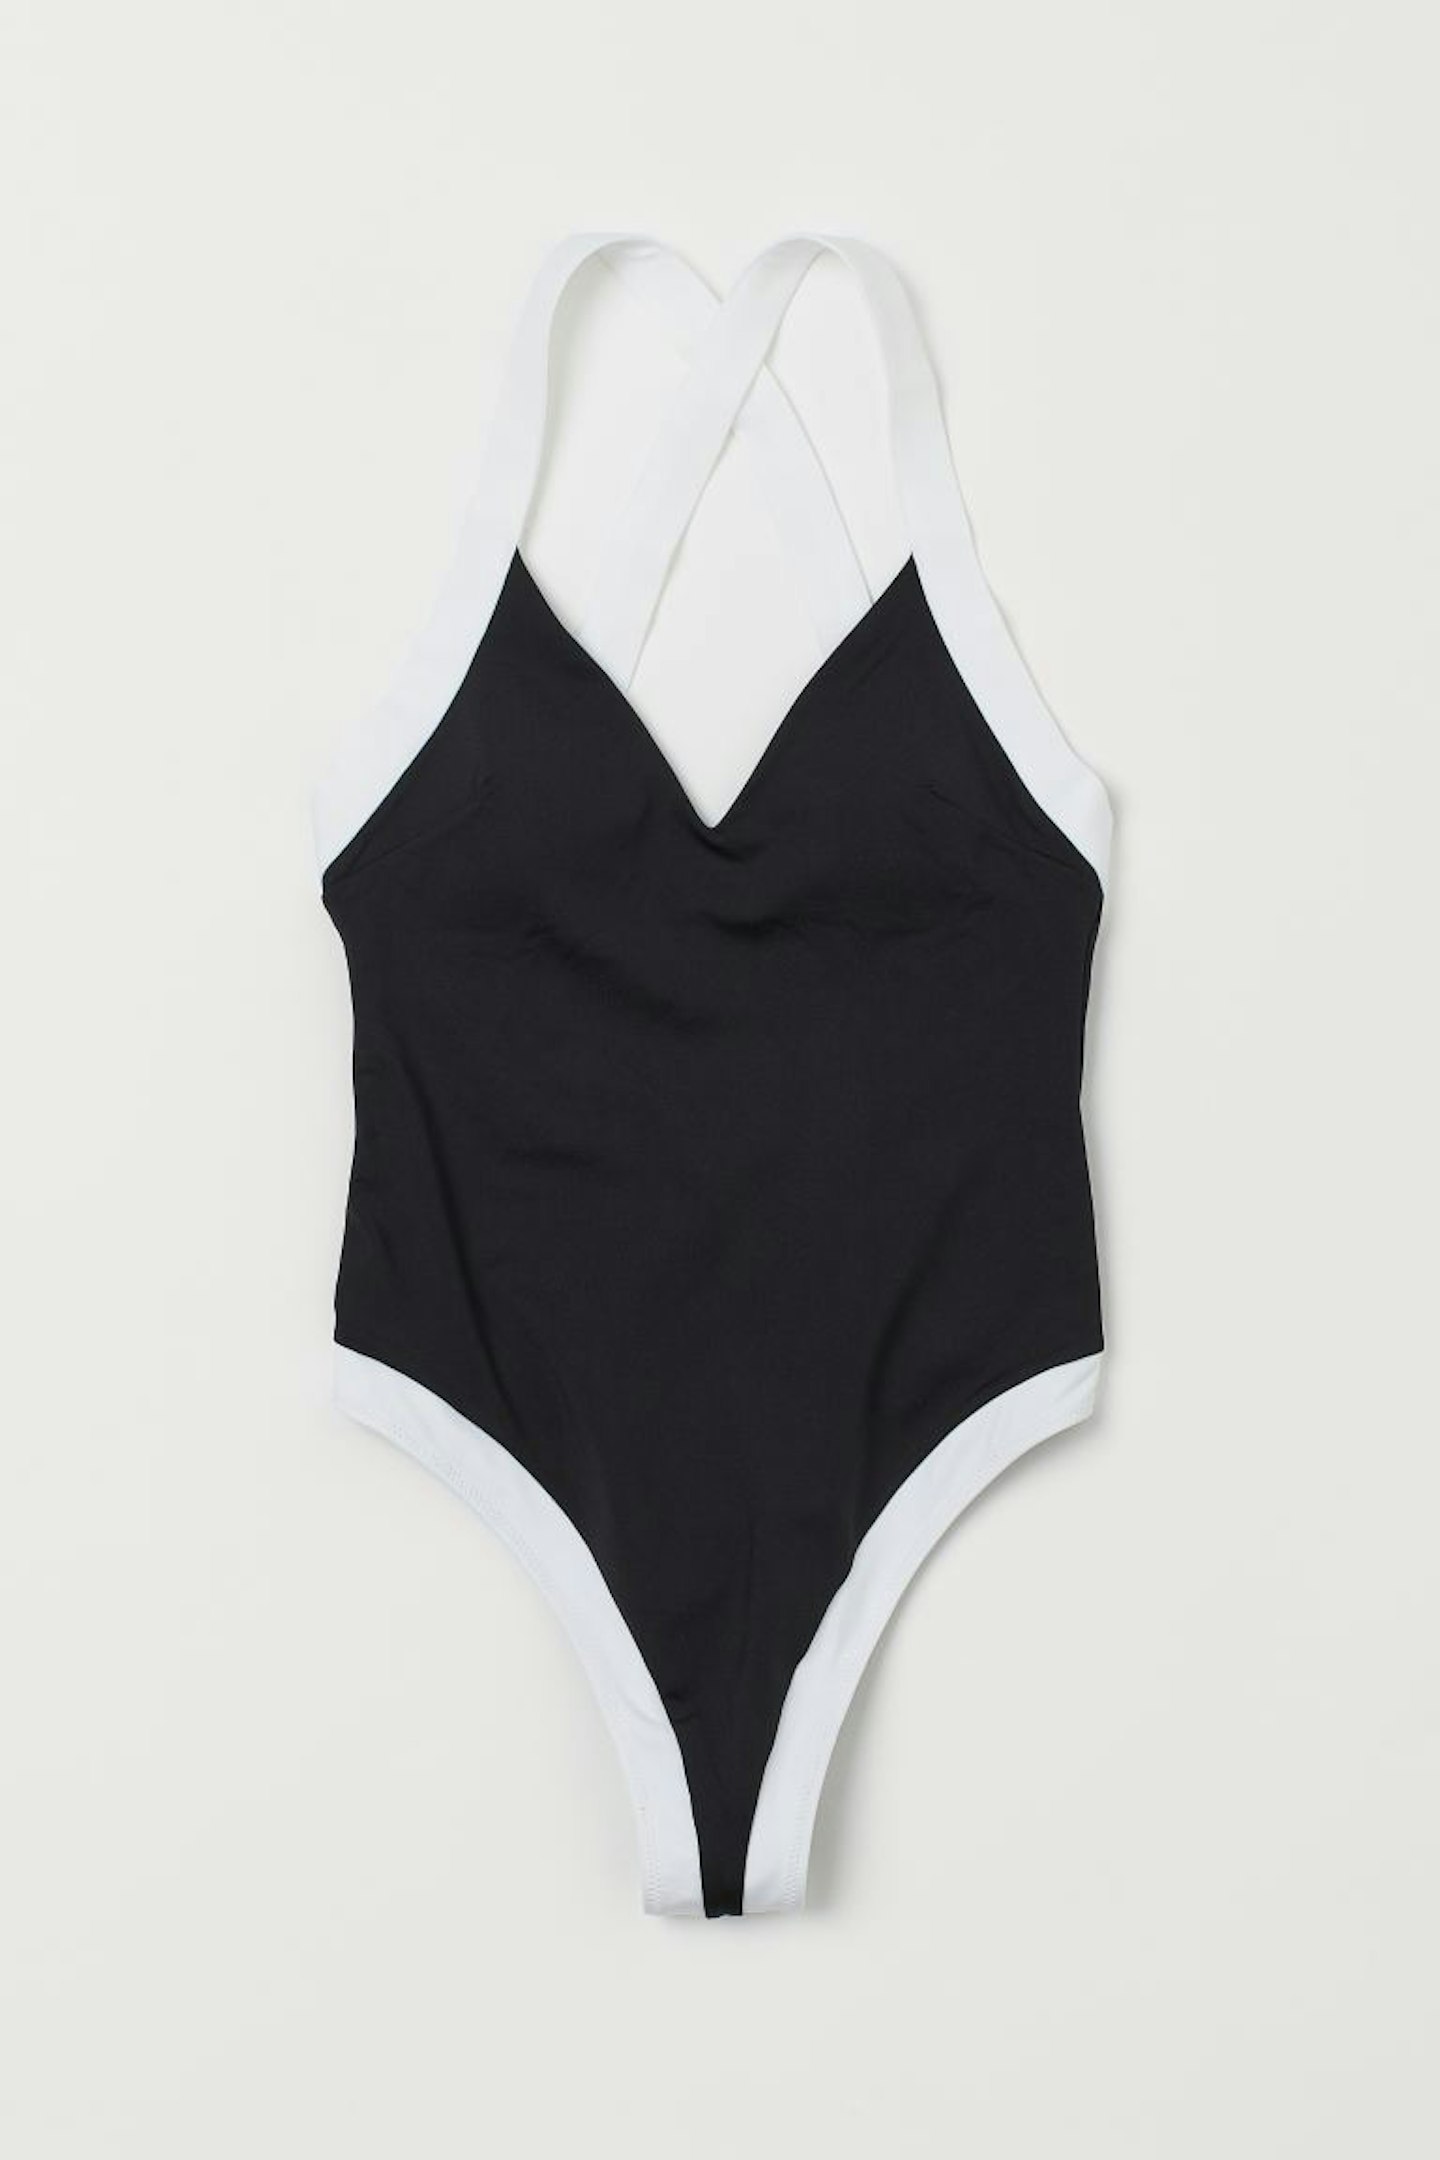 H&M, High Leg Swimsuit, WAS £24.99 NOW £10